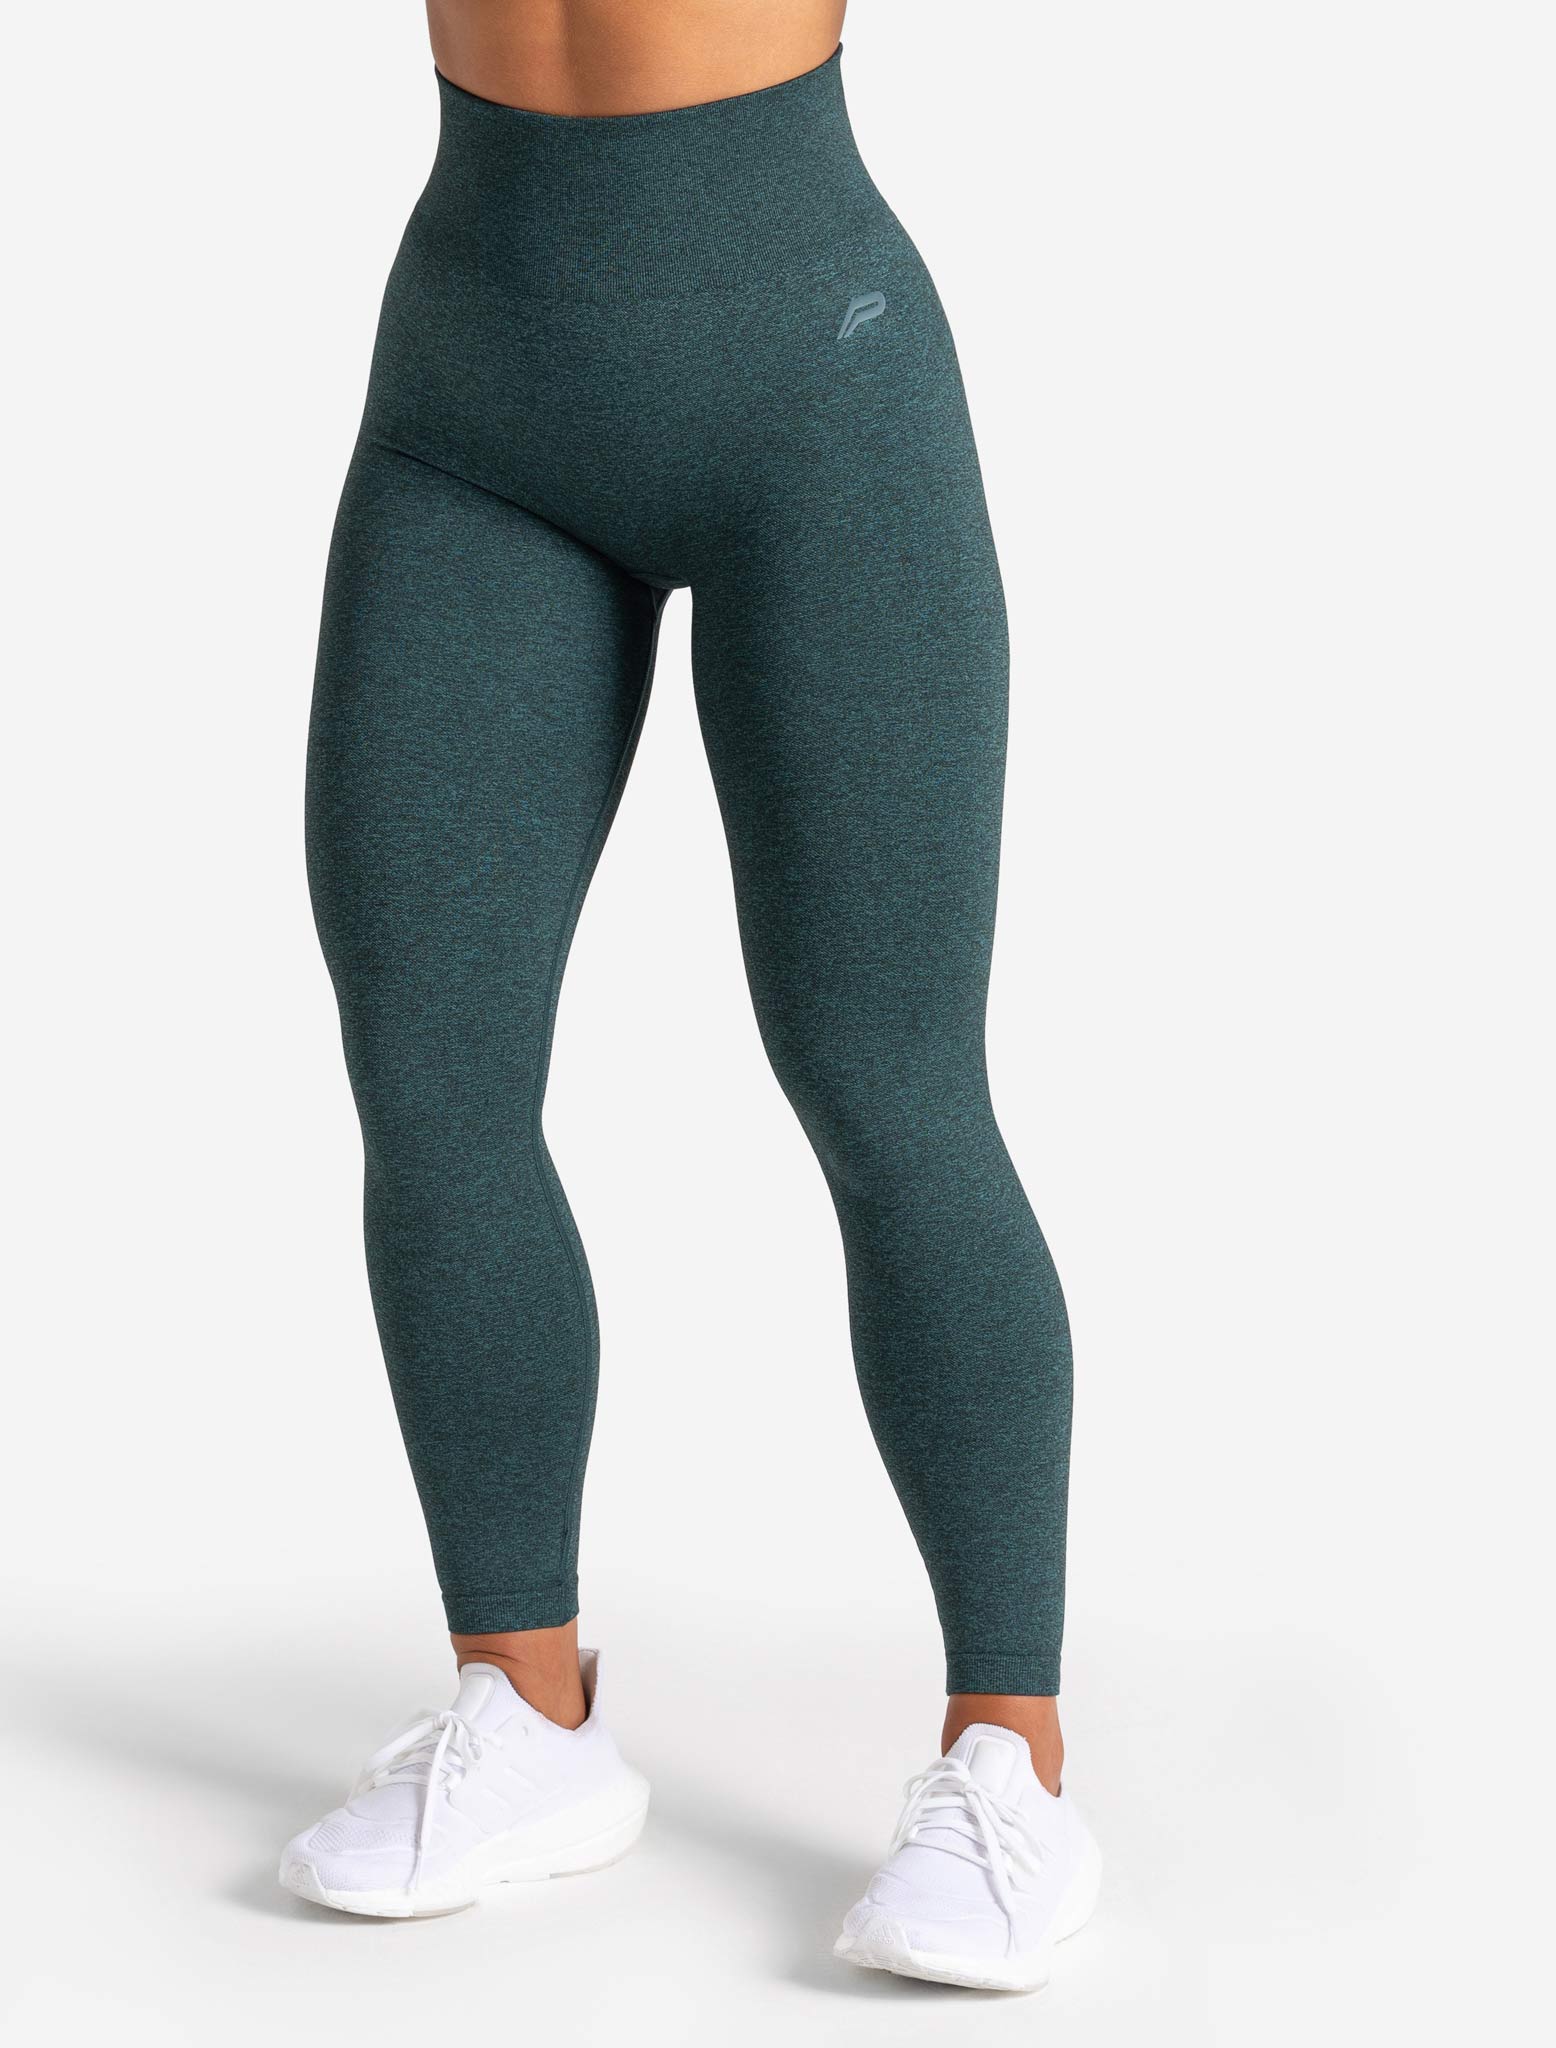 Core Seamless, More Stretch, More Comfort, More Support